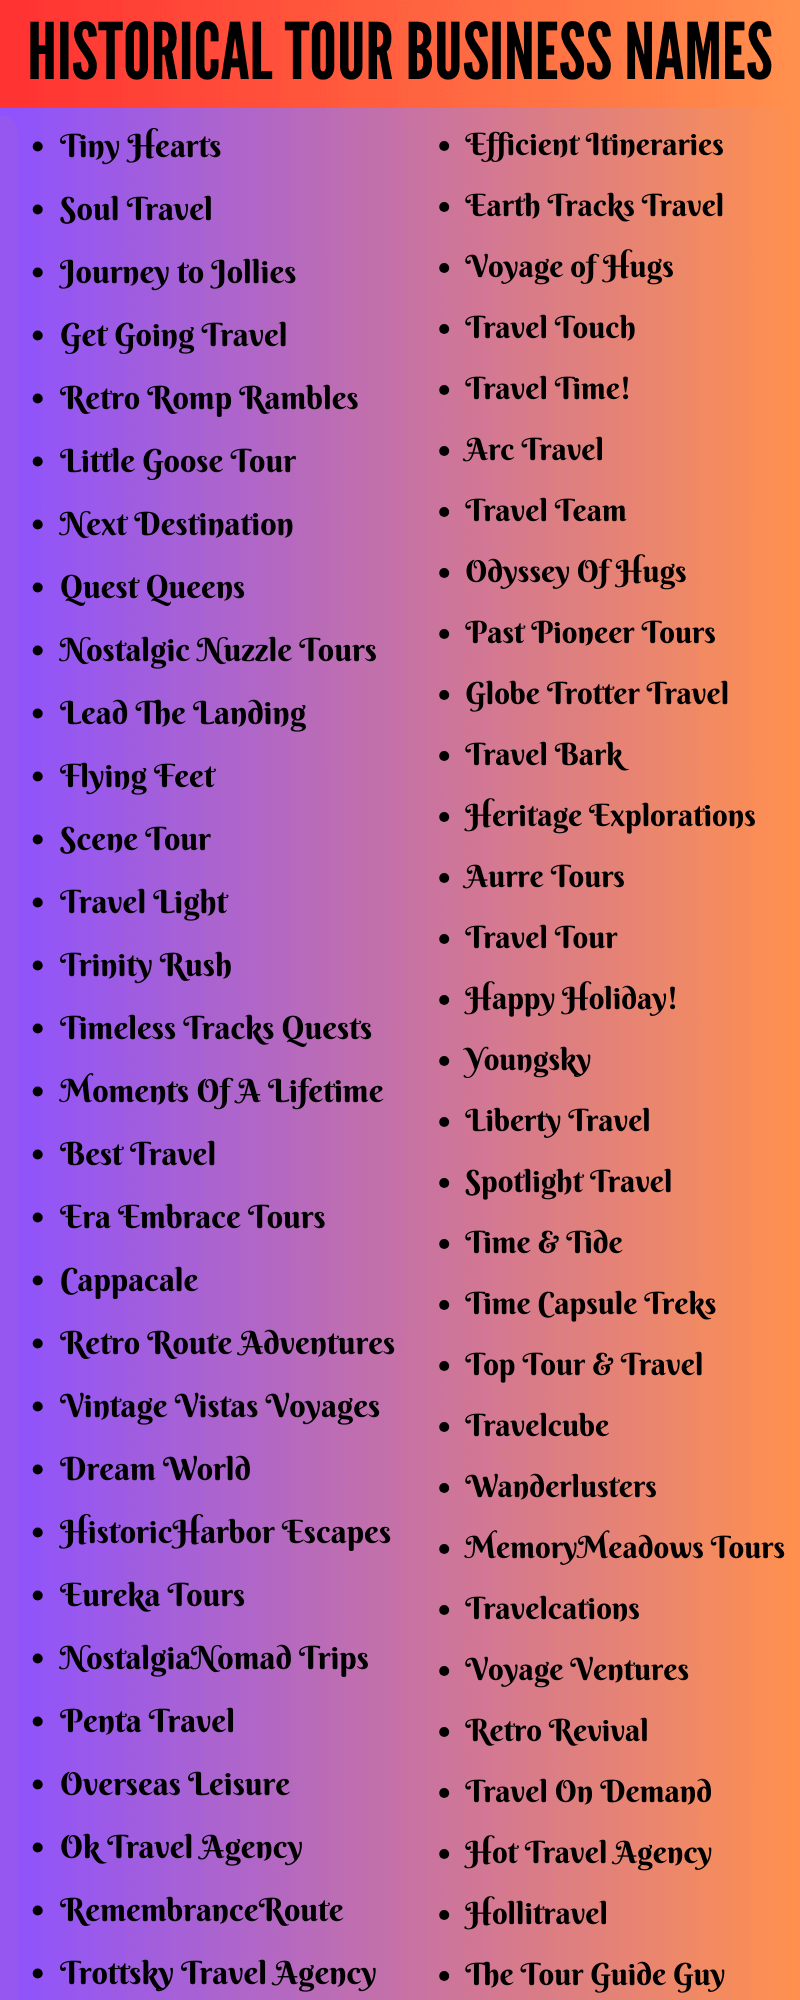 Historical Tour Business Names